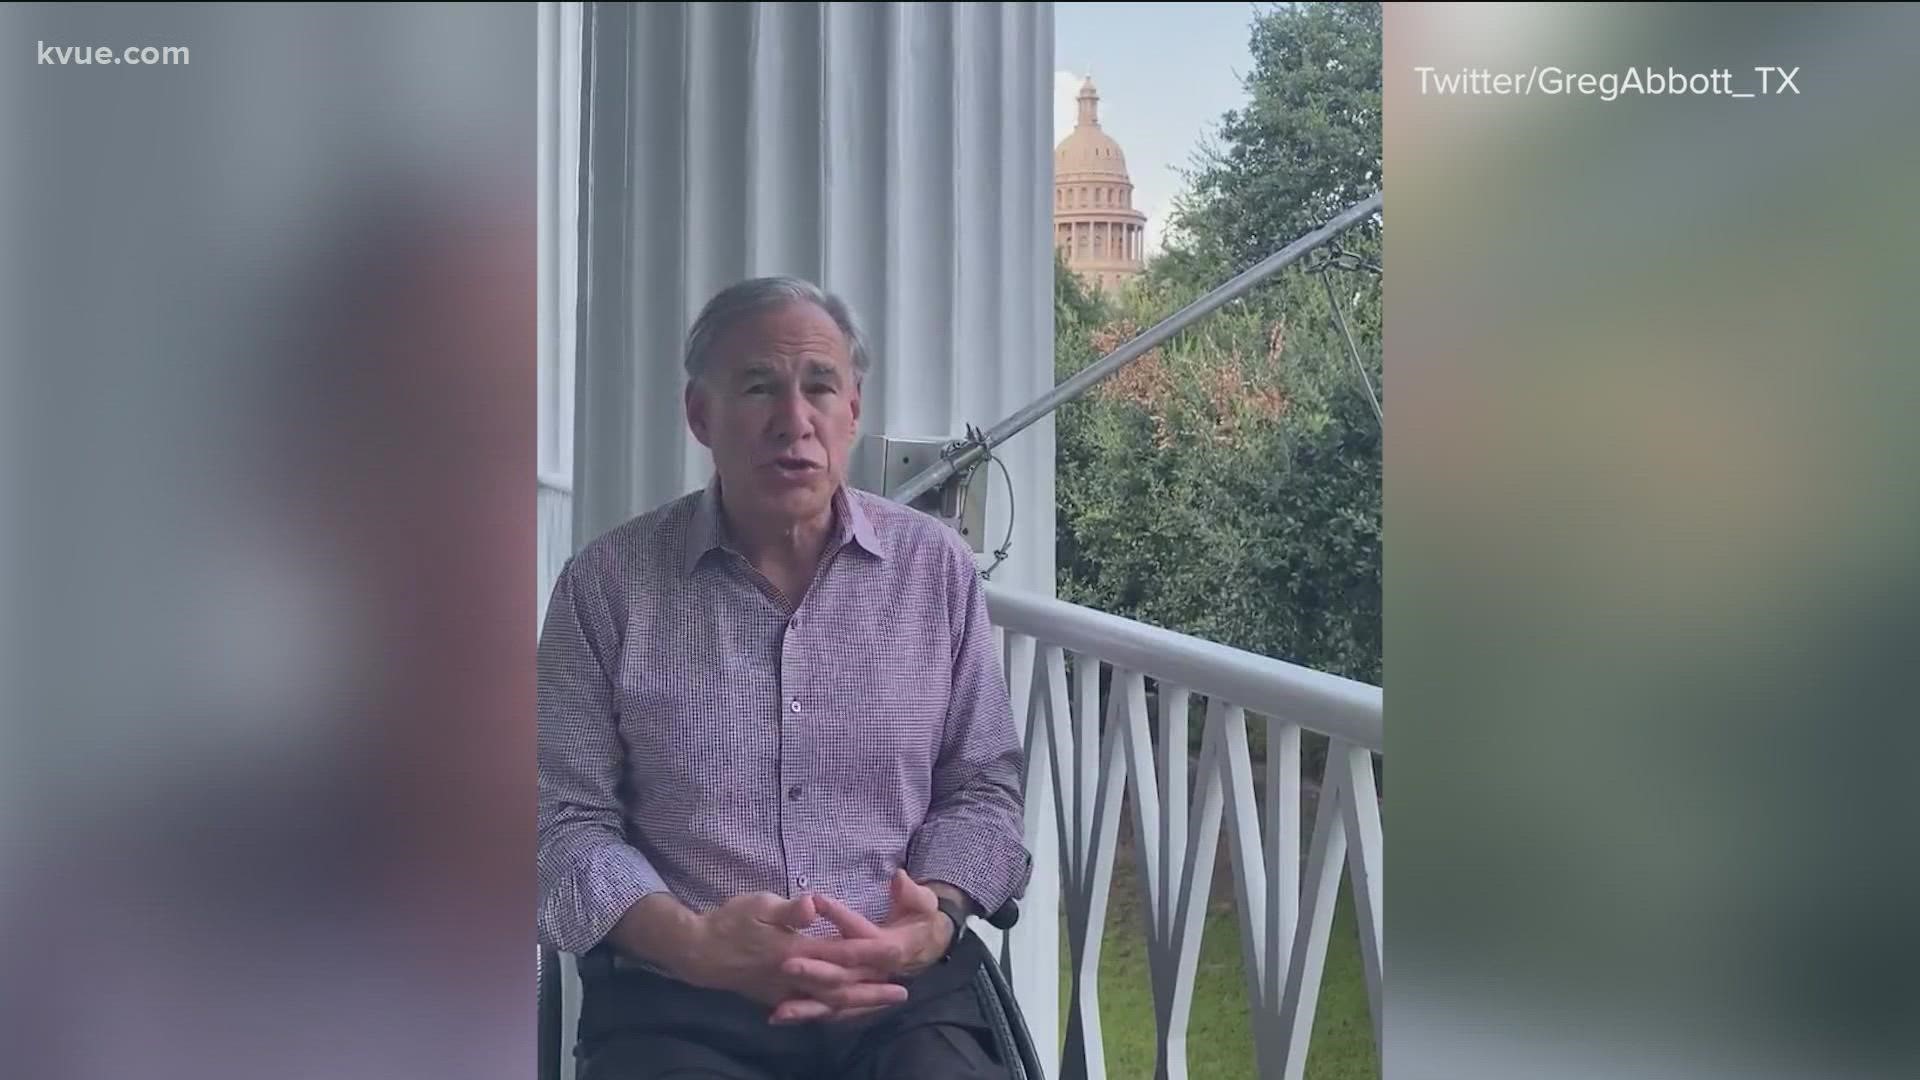 Gov. Greg Abbott announced that, as of Saturday, he is testing negative for COVID-19. He first tested positive on Tuesday.